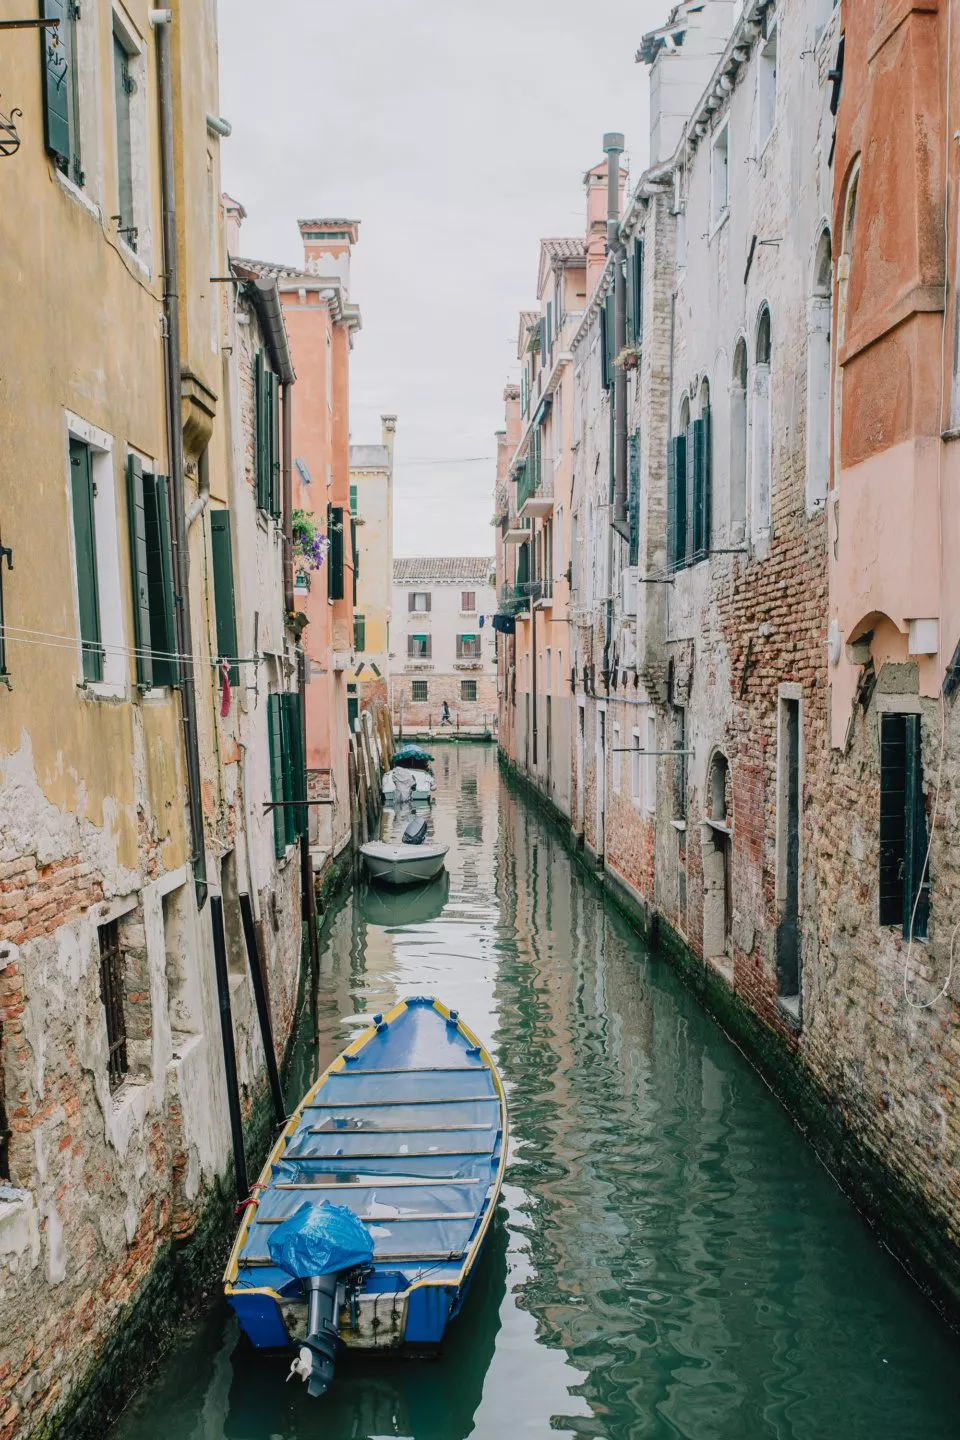 Boats in canal in Venice, Italy